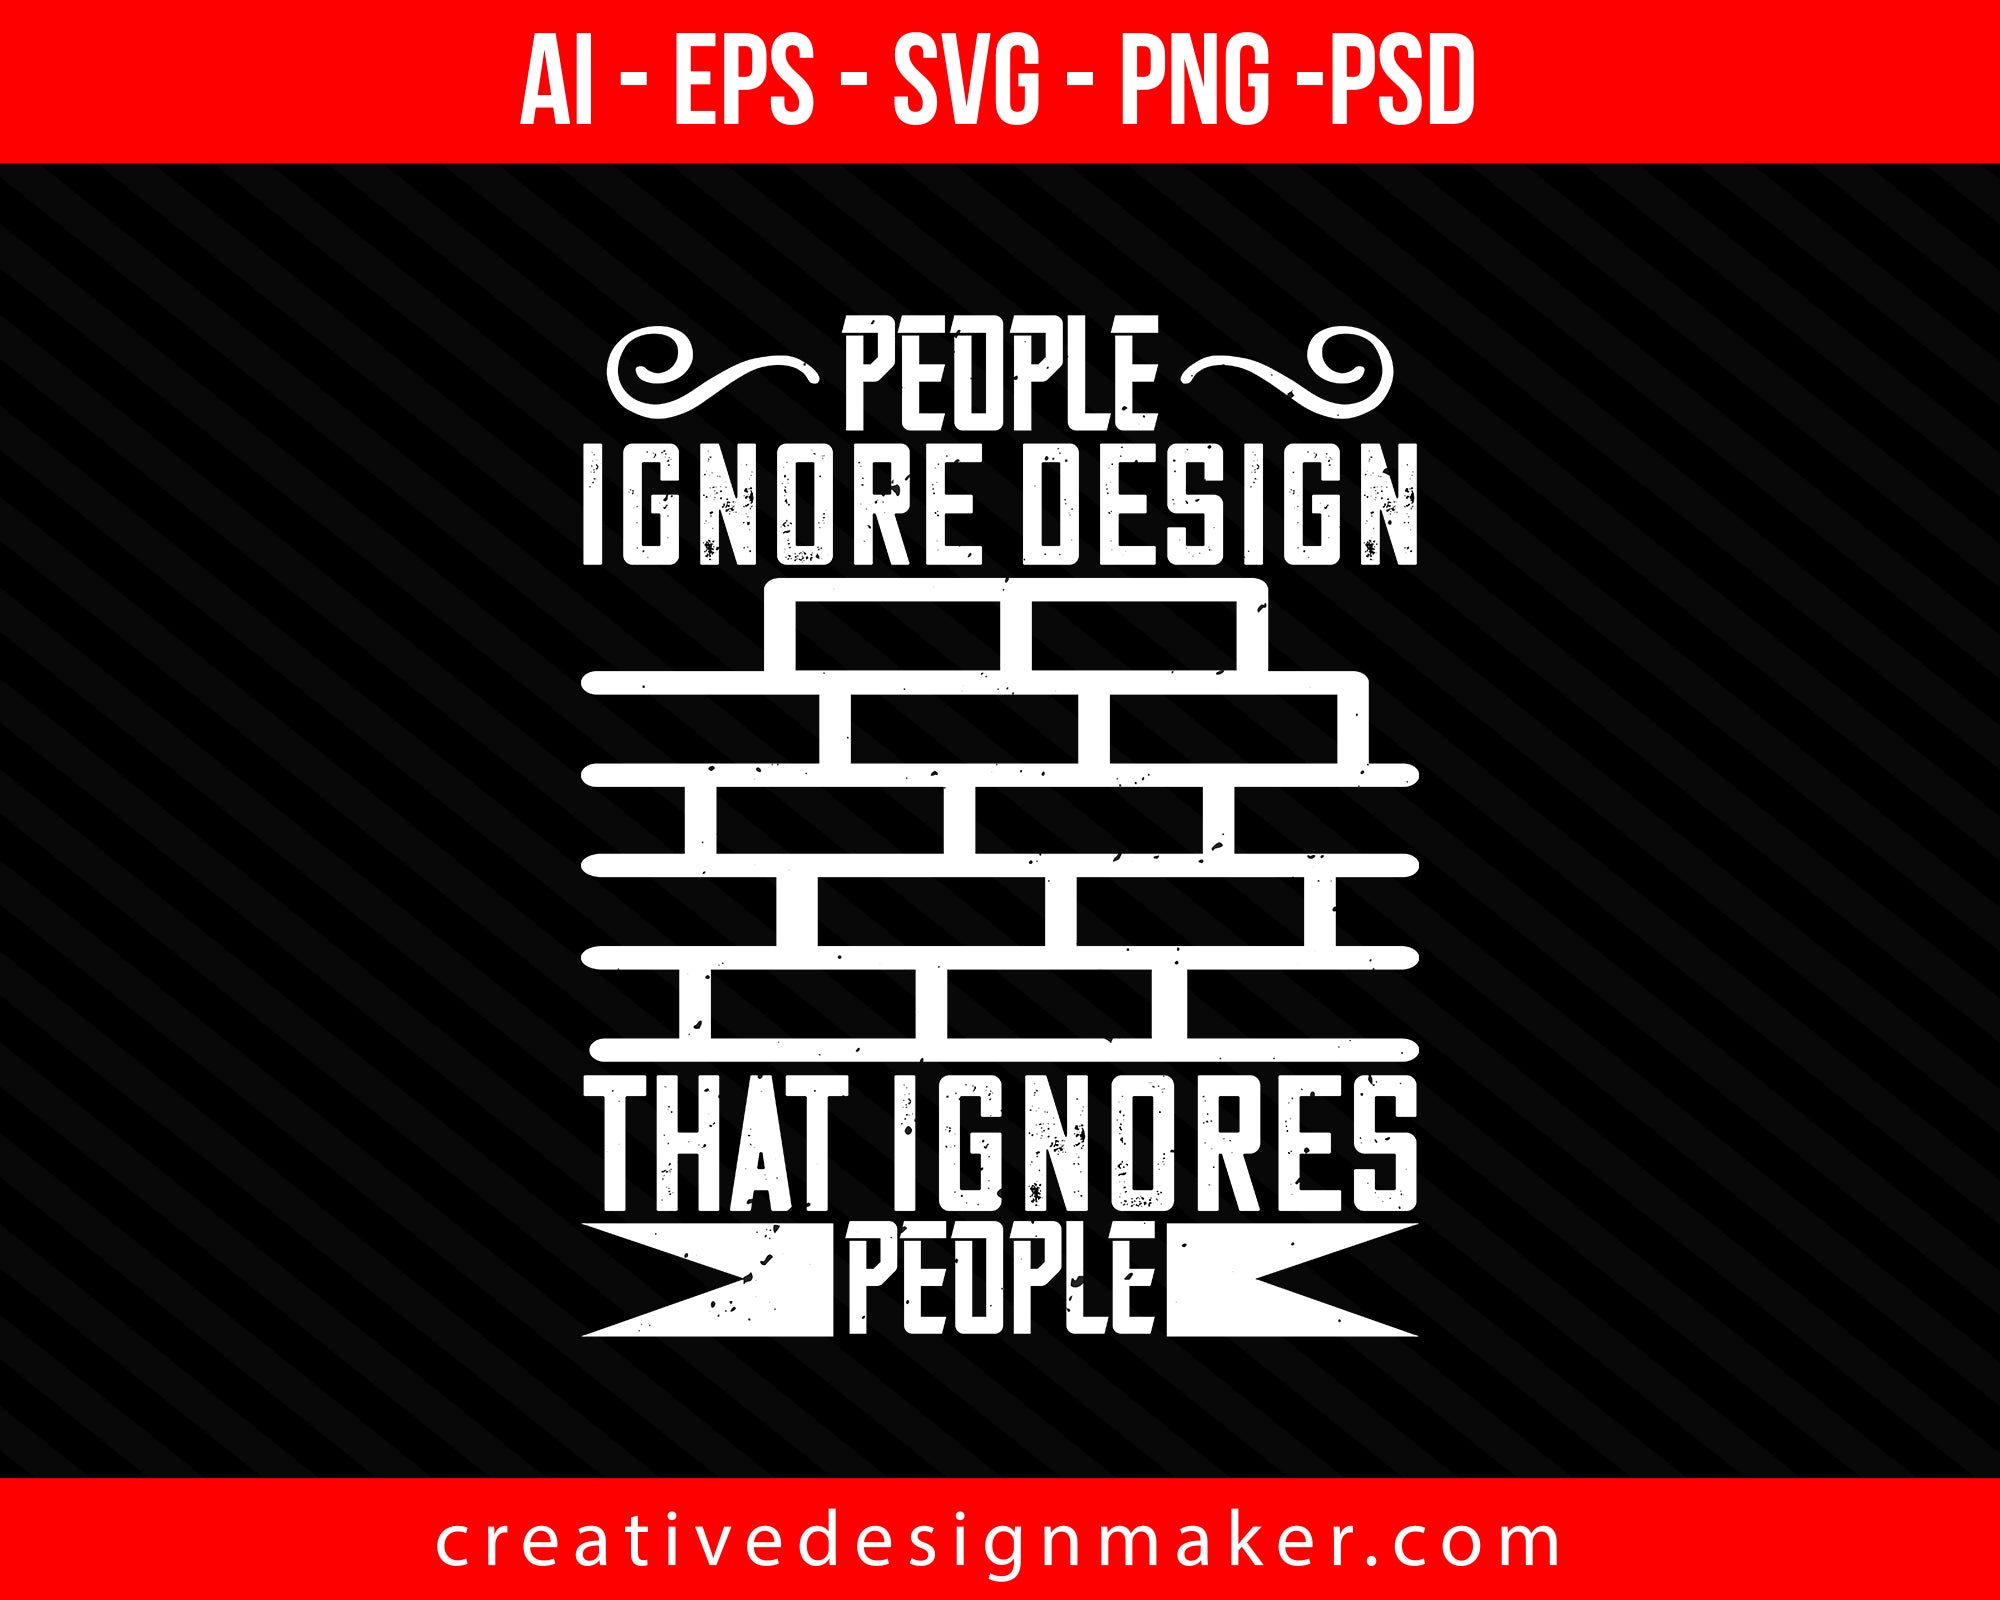 People ignore design that ignores people Architect Print Ready Editable T-Shirt SVG Design!